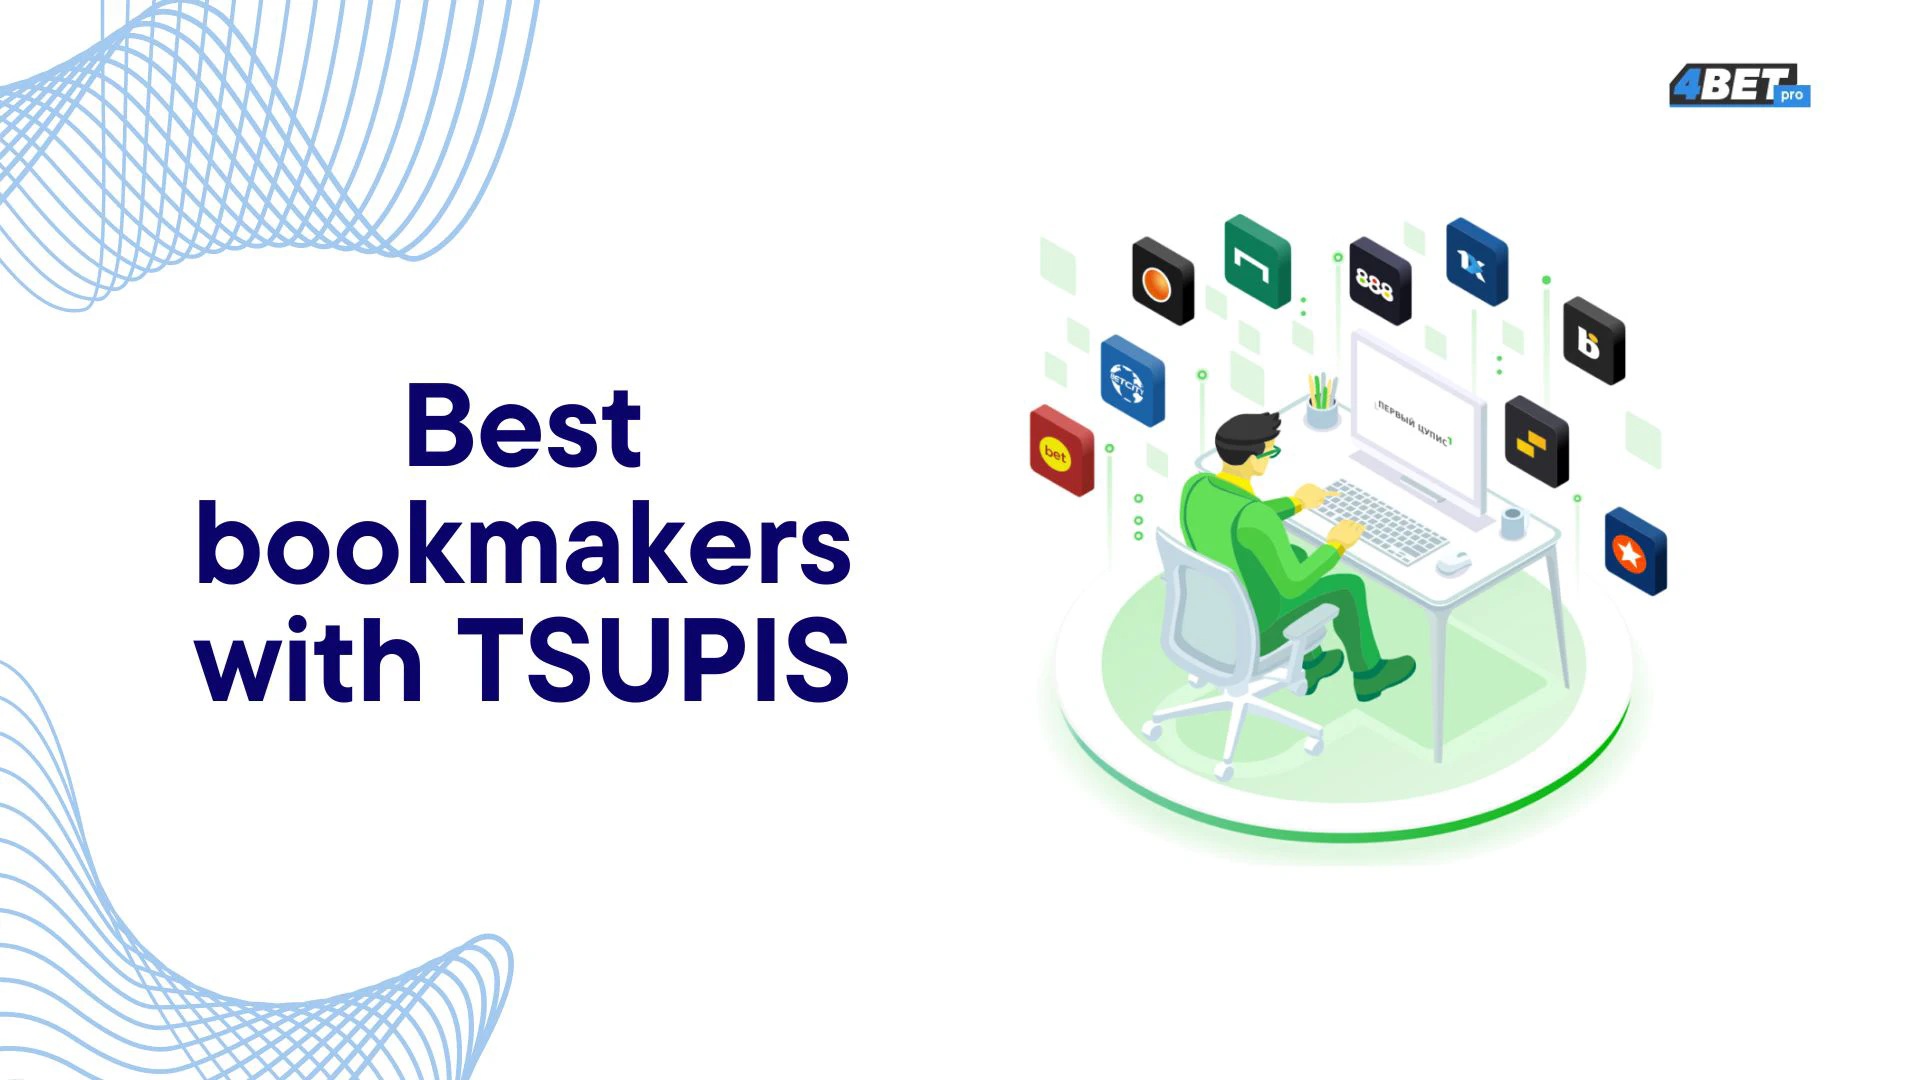 Which bookmakers work with TSUPIS